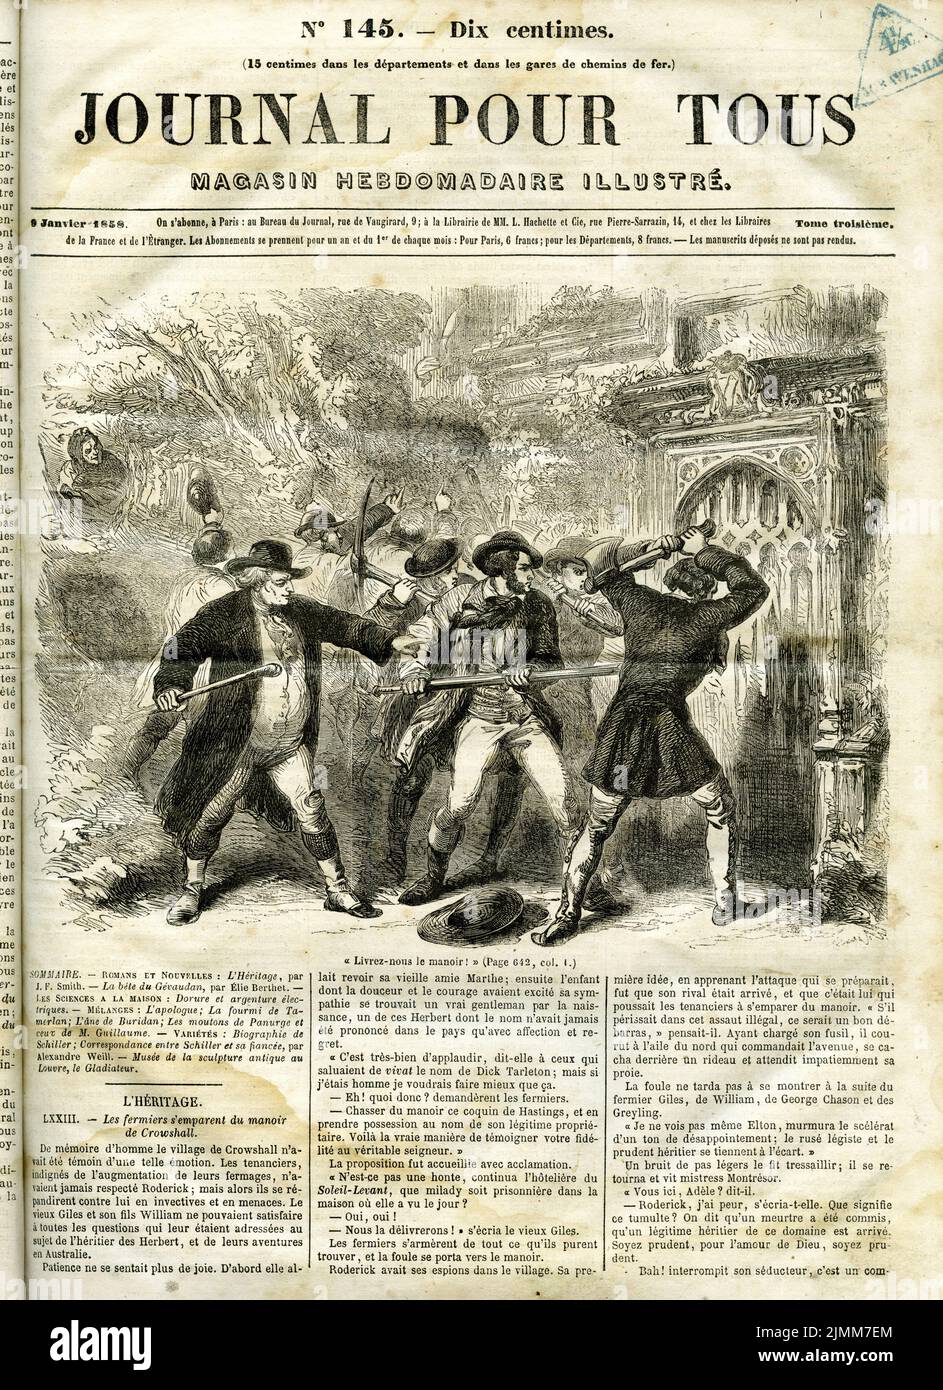 Front cover of the French magazine Journal Pour Tous (newspaper for all) in 1856, showing a crowd attacking a building Stock Photo